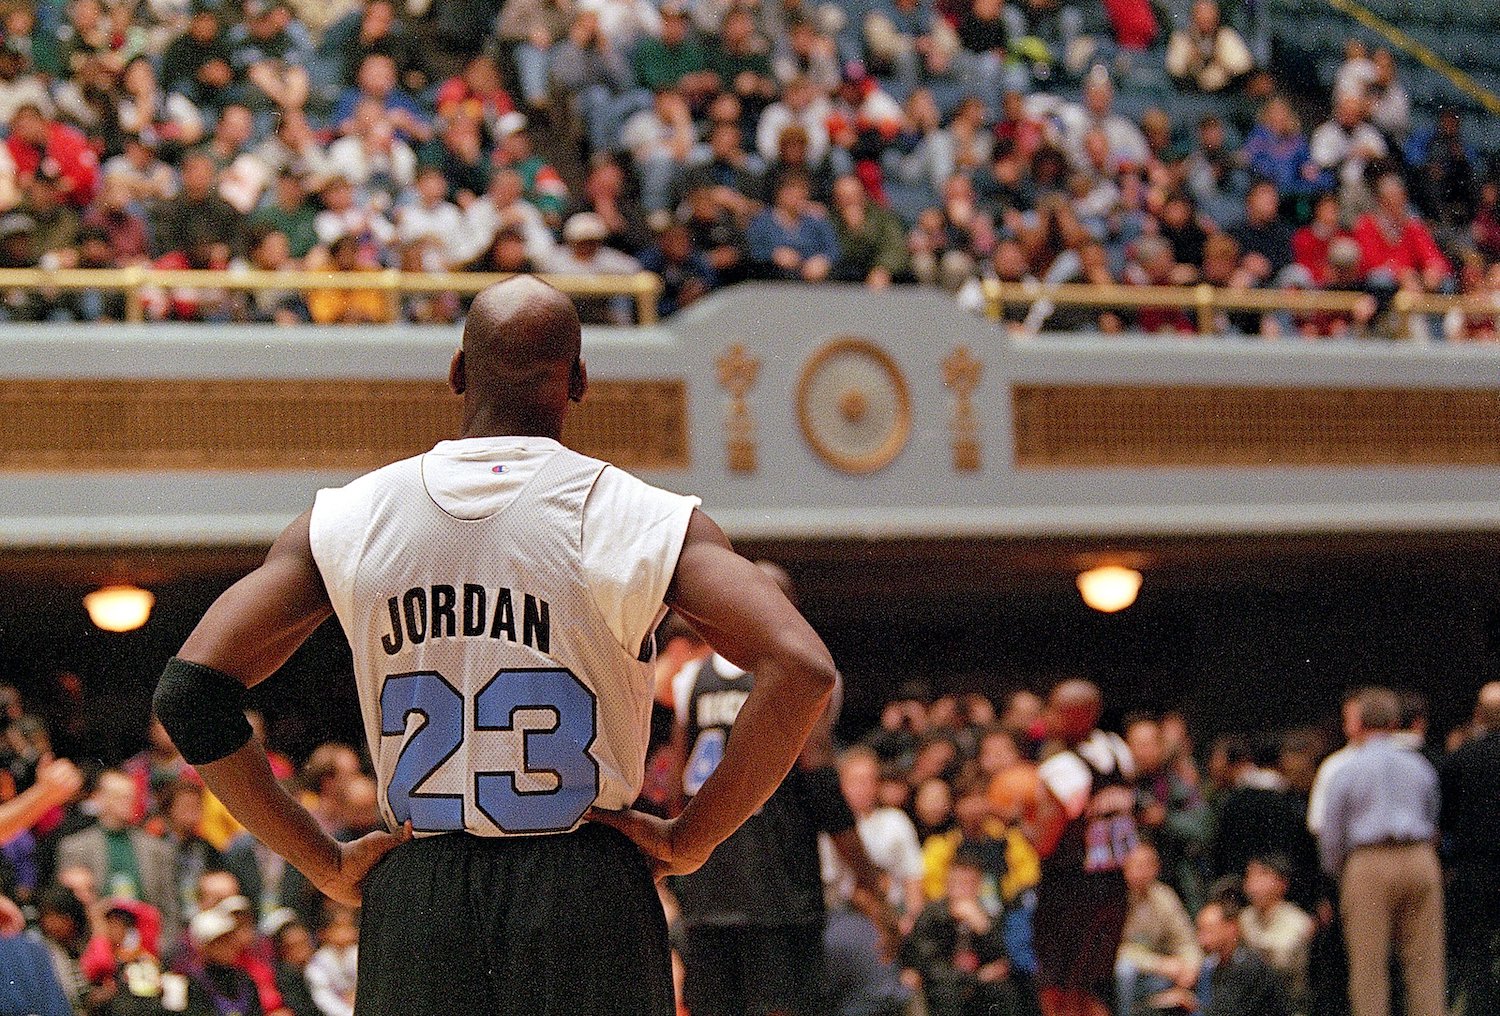 Michael Jordan looks at the crowd during a practice ahead of the 1997 NBA All-Star Game.